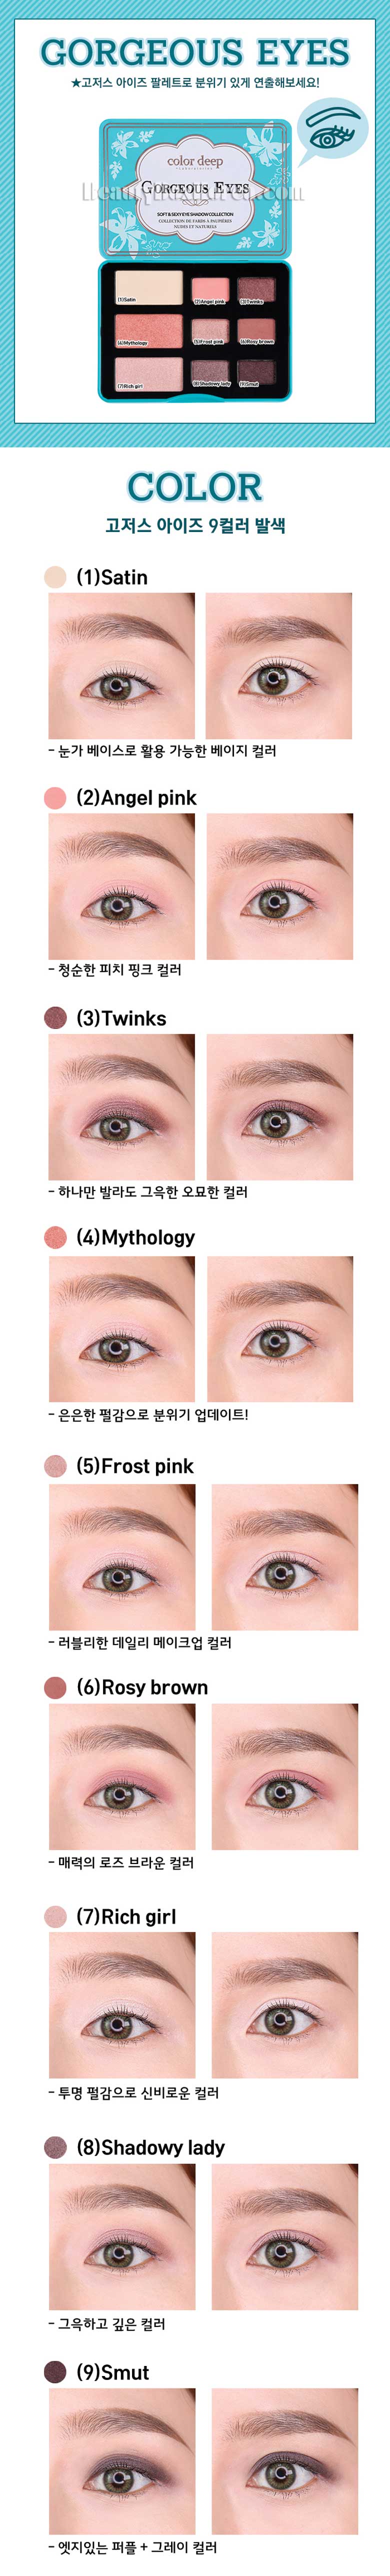 Color Deep 9 Color Gorgeous Eyes Eyeshdow Palette 10 2g Best Price And Fast Shipping From Beauty Box Korea